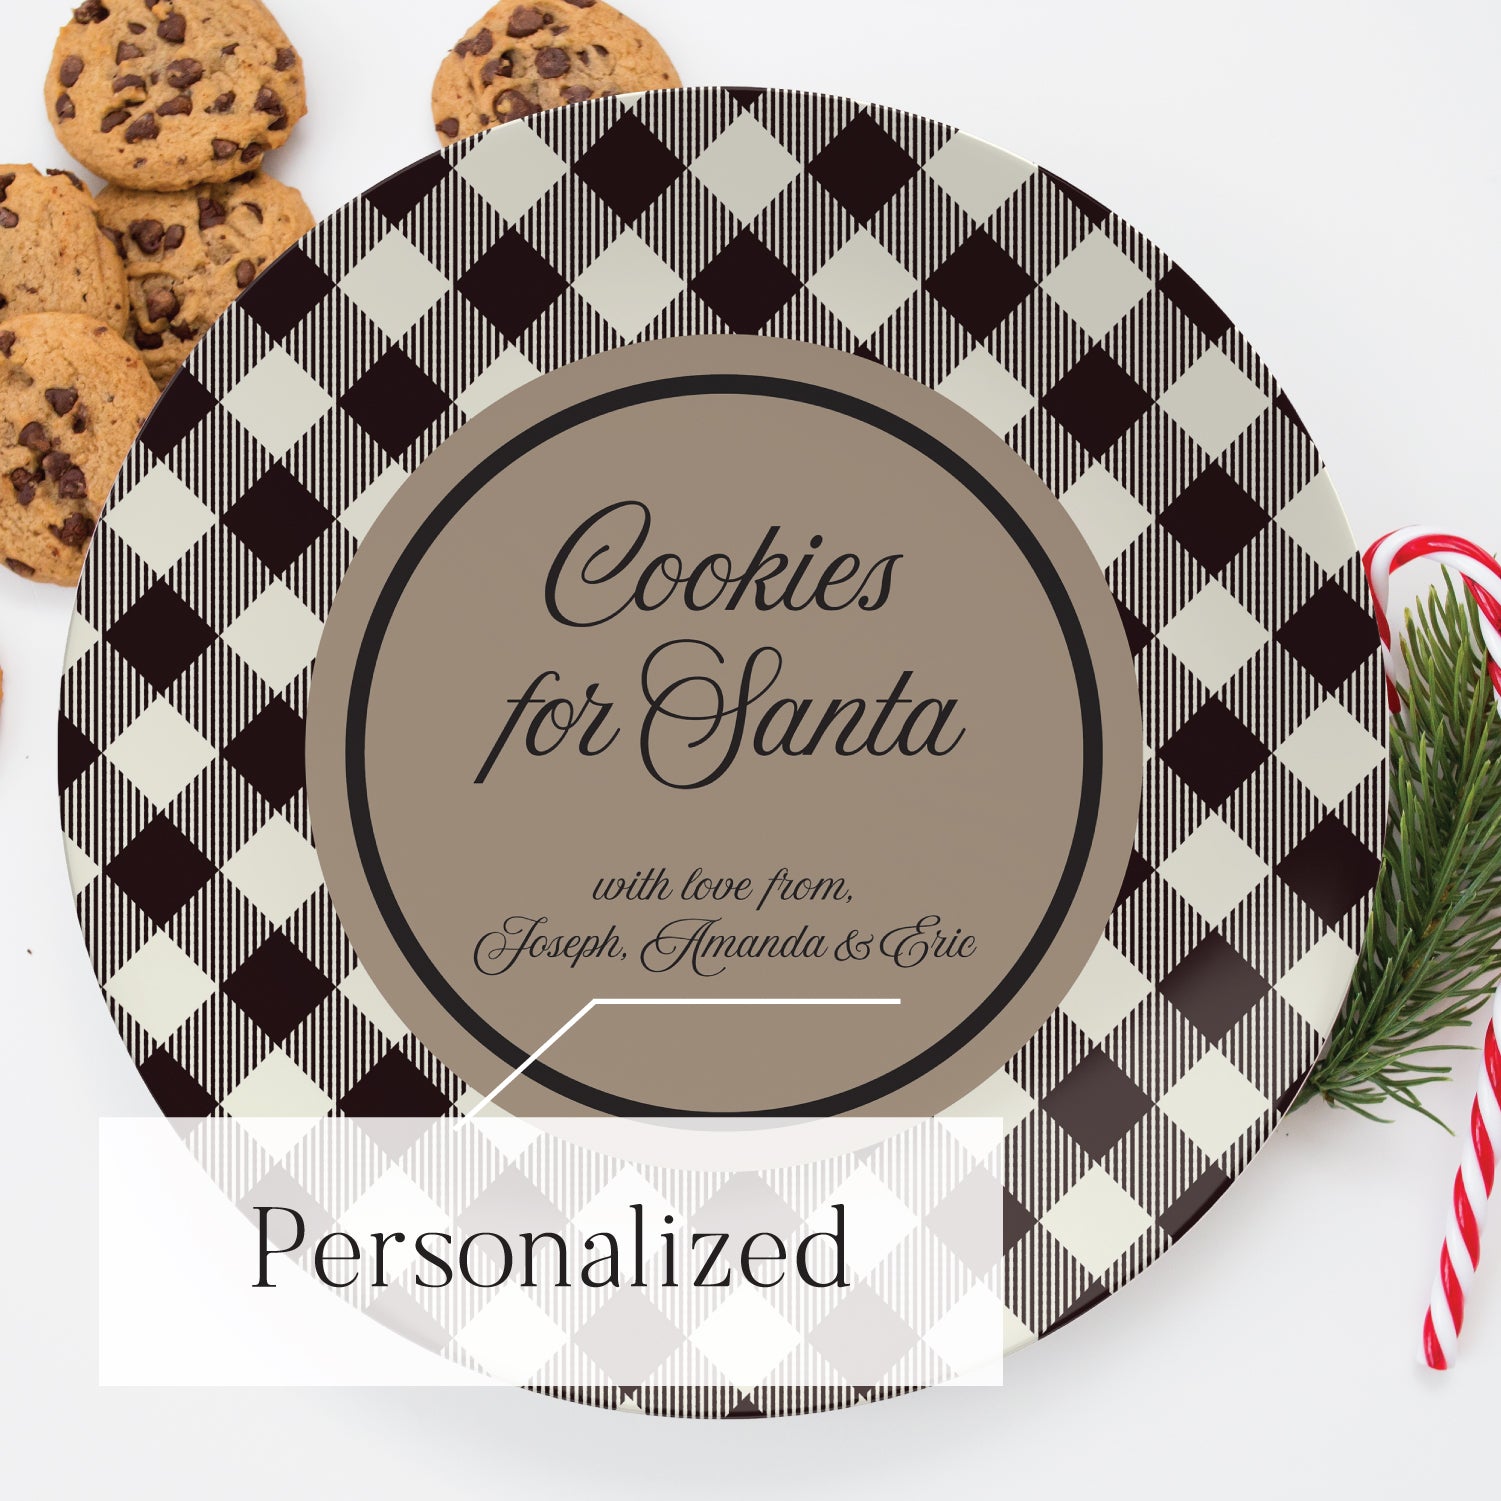 Personalized Cookies For Santa Plate - Black and White Buffalo Plaid Personalized with Kids Names - Santa cookie plate, cookies for Santa personalized plate, buffalo check, black and white plaid plate